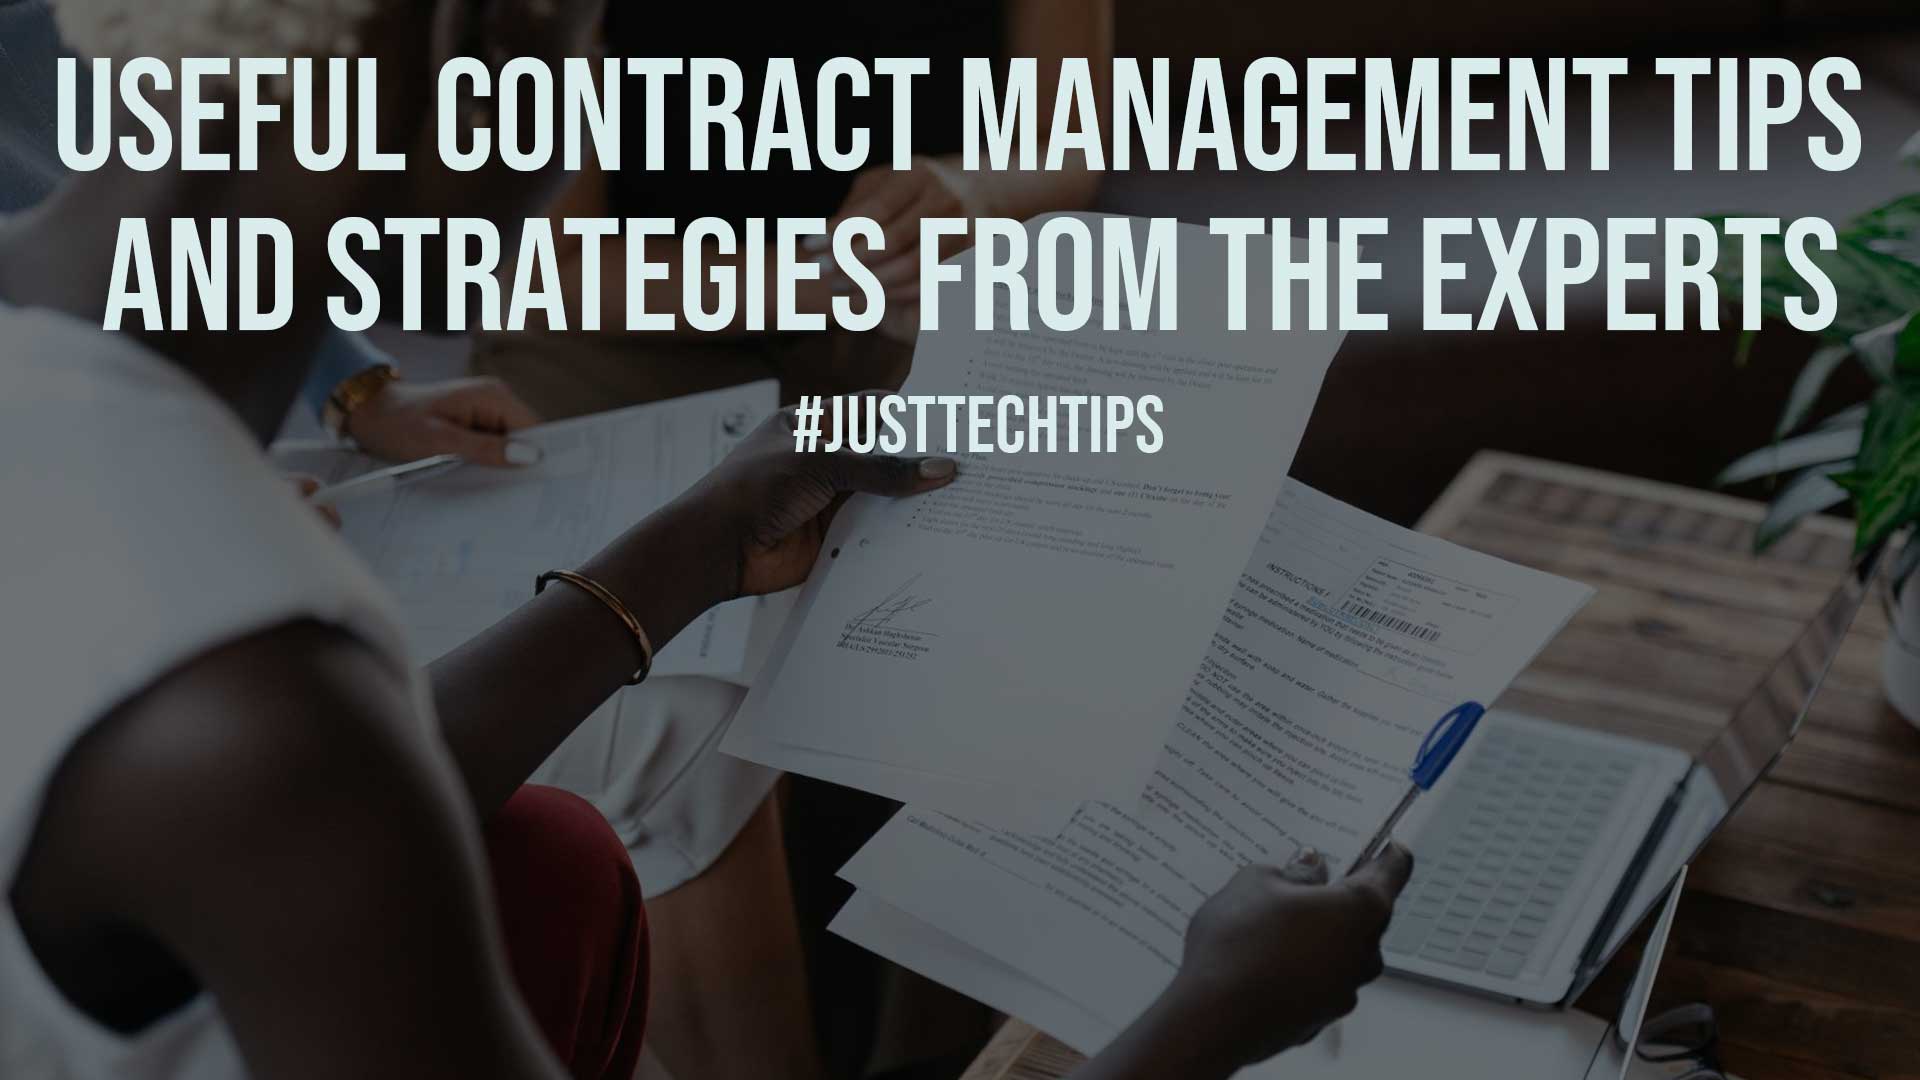 Useful Contract Management Tips and Strategies From the Experts